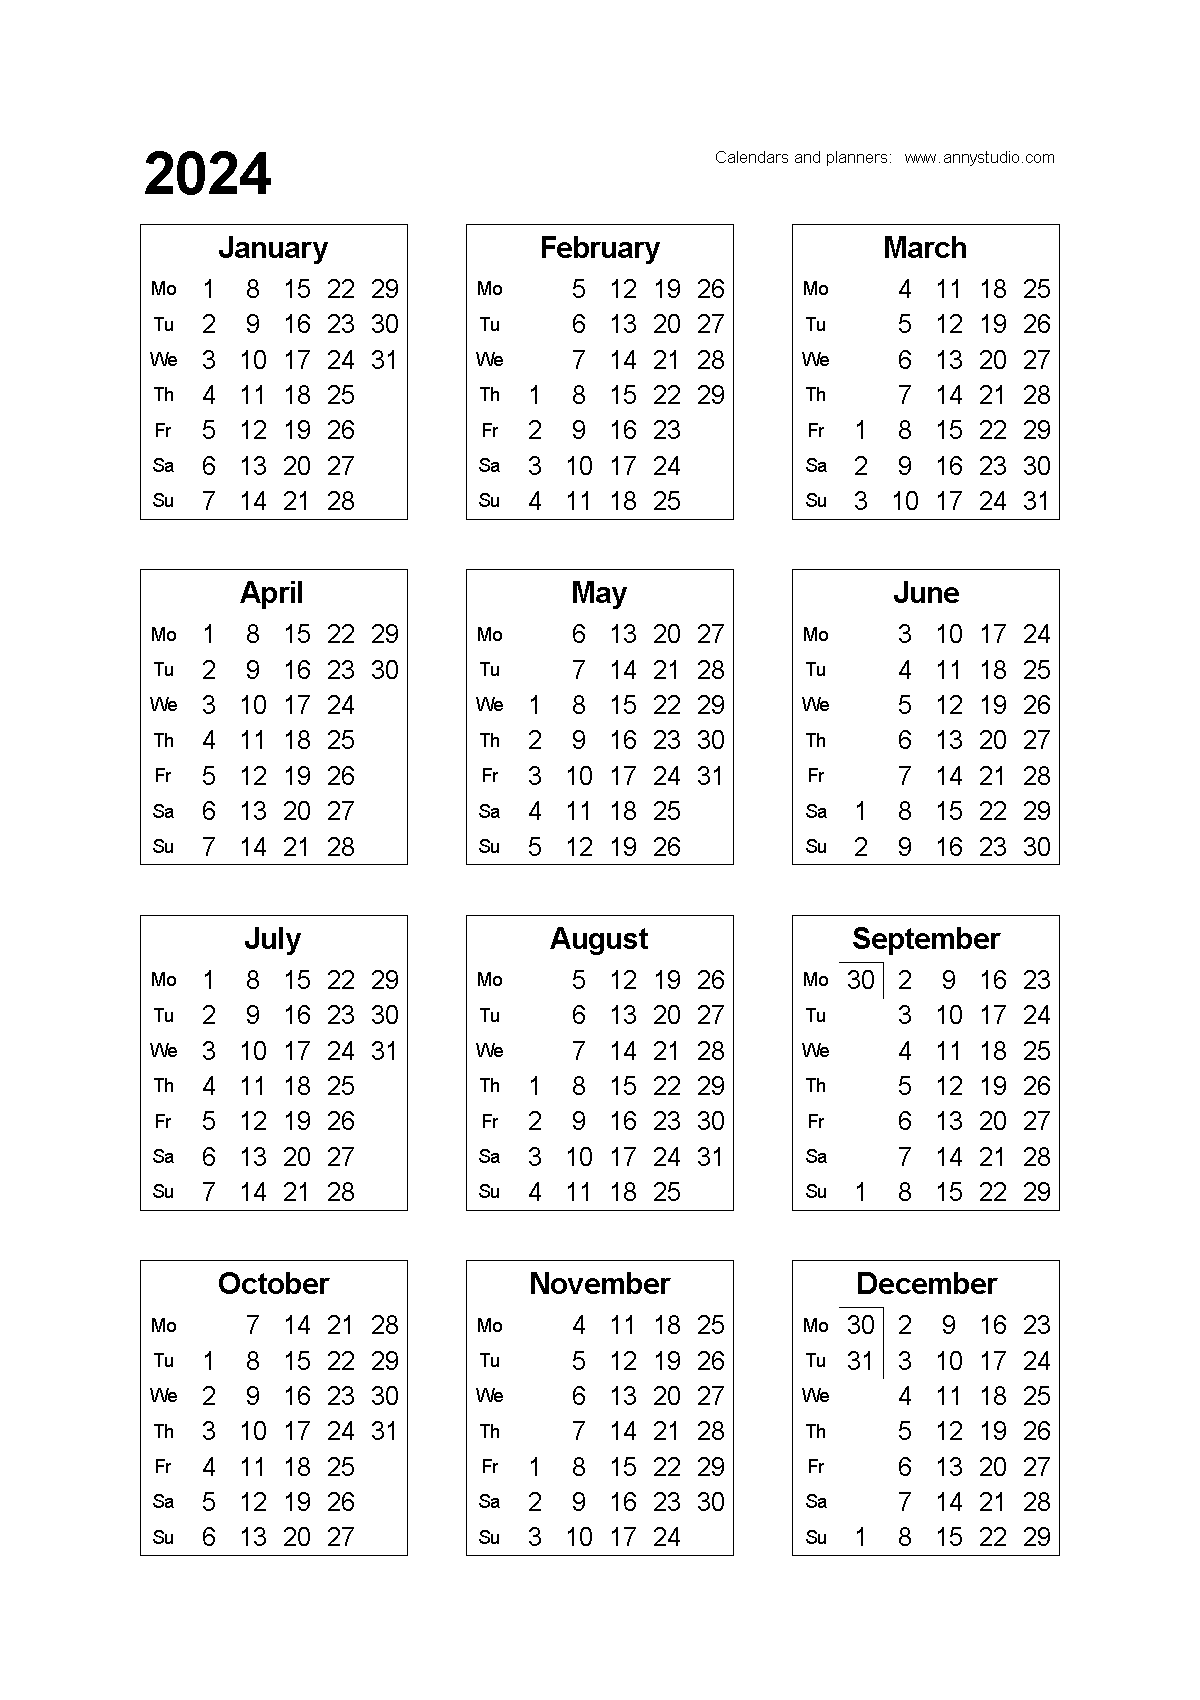 Free Printable Calendars And Planners 2024, 2025 And 2026 intended for Free Printable Calendar 2024 A4